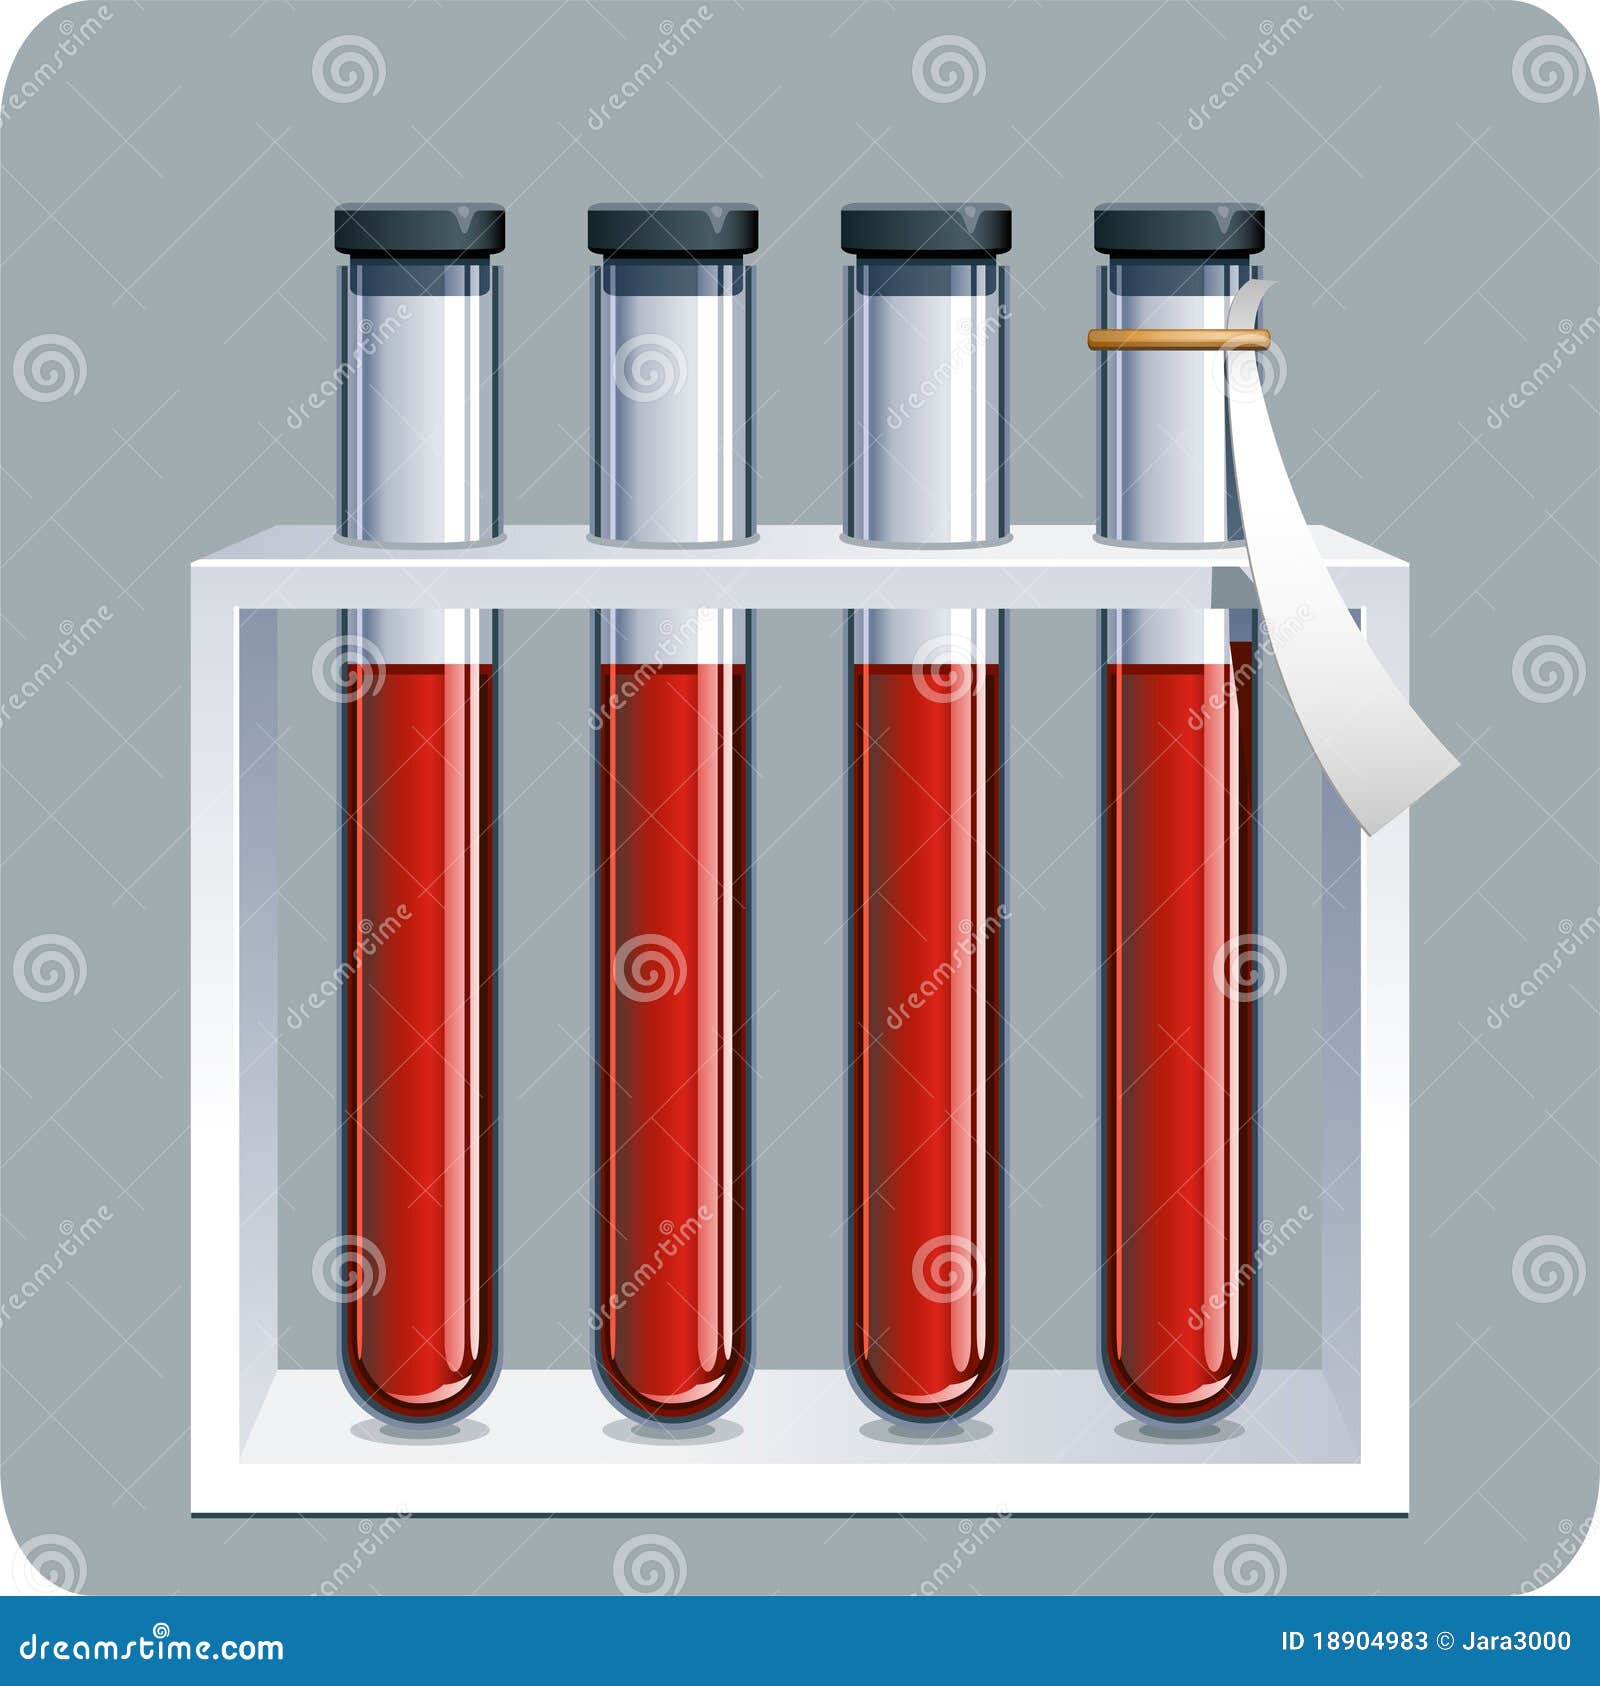 clipart blood sample - photo #13